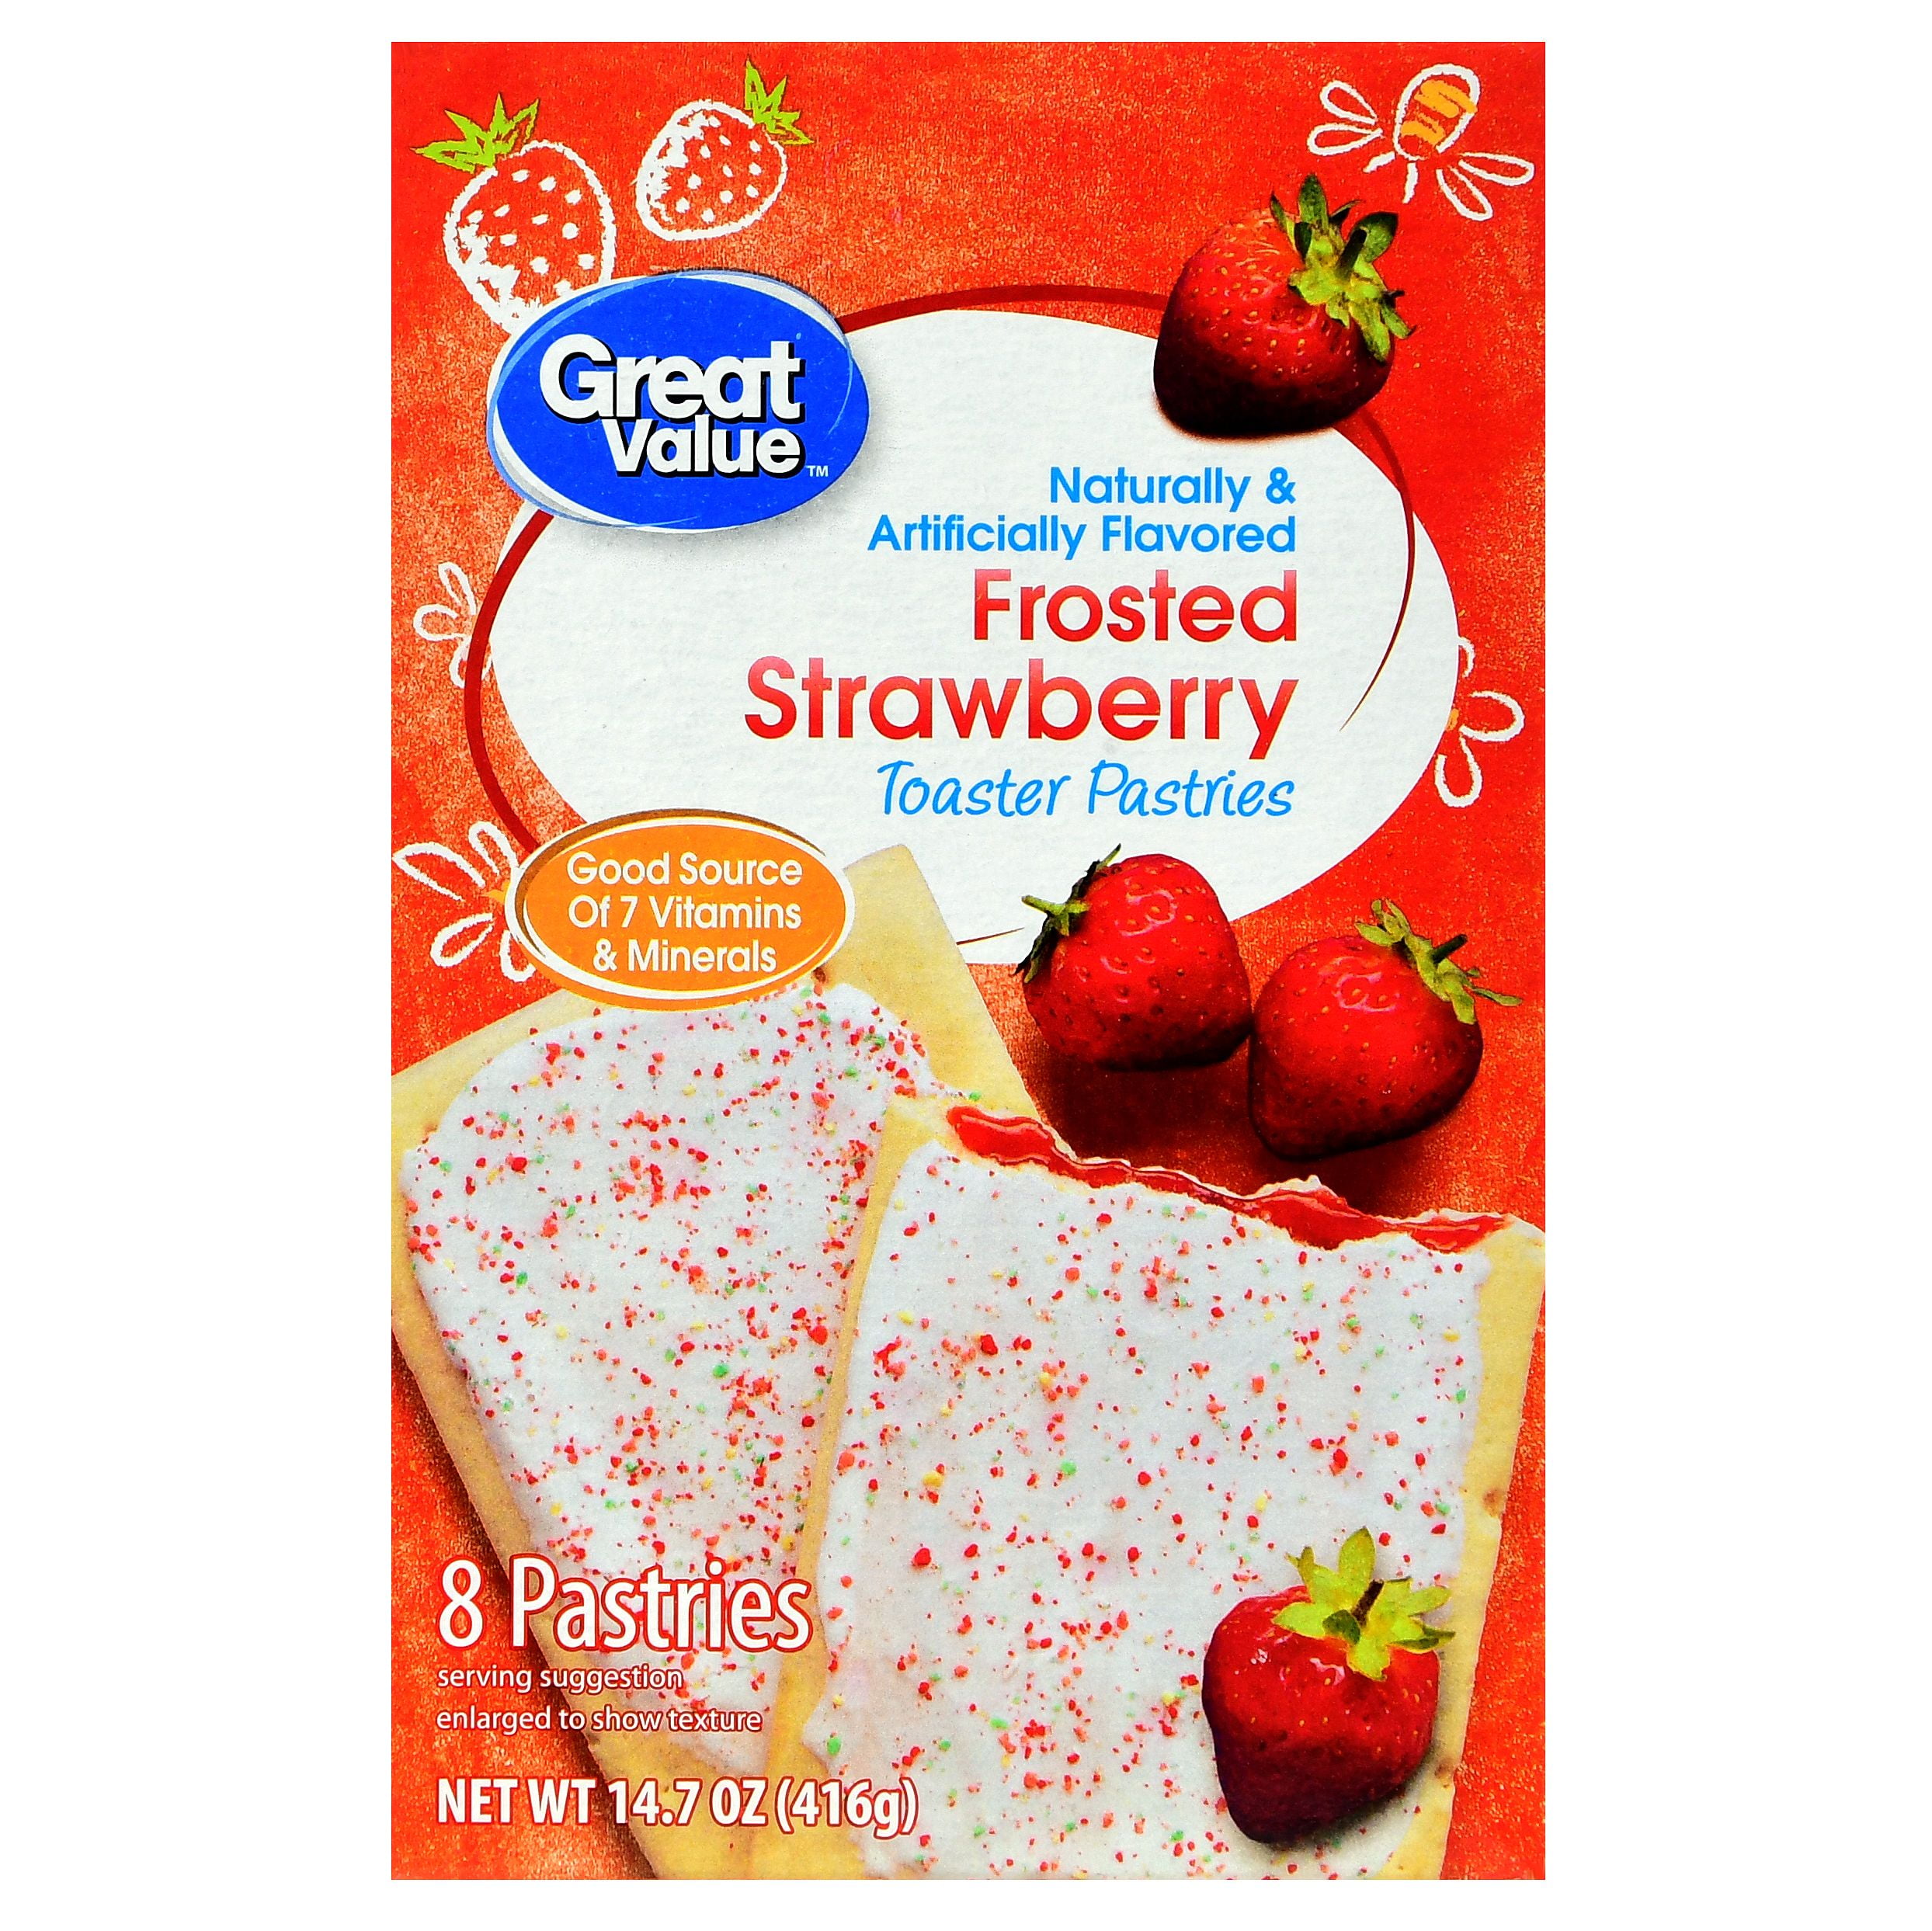 Pop-Tarts Frosted Strawberry Toaster Pastries 2ct – BevMo!